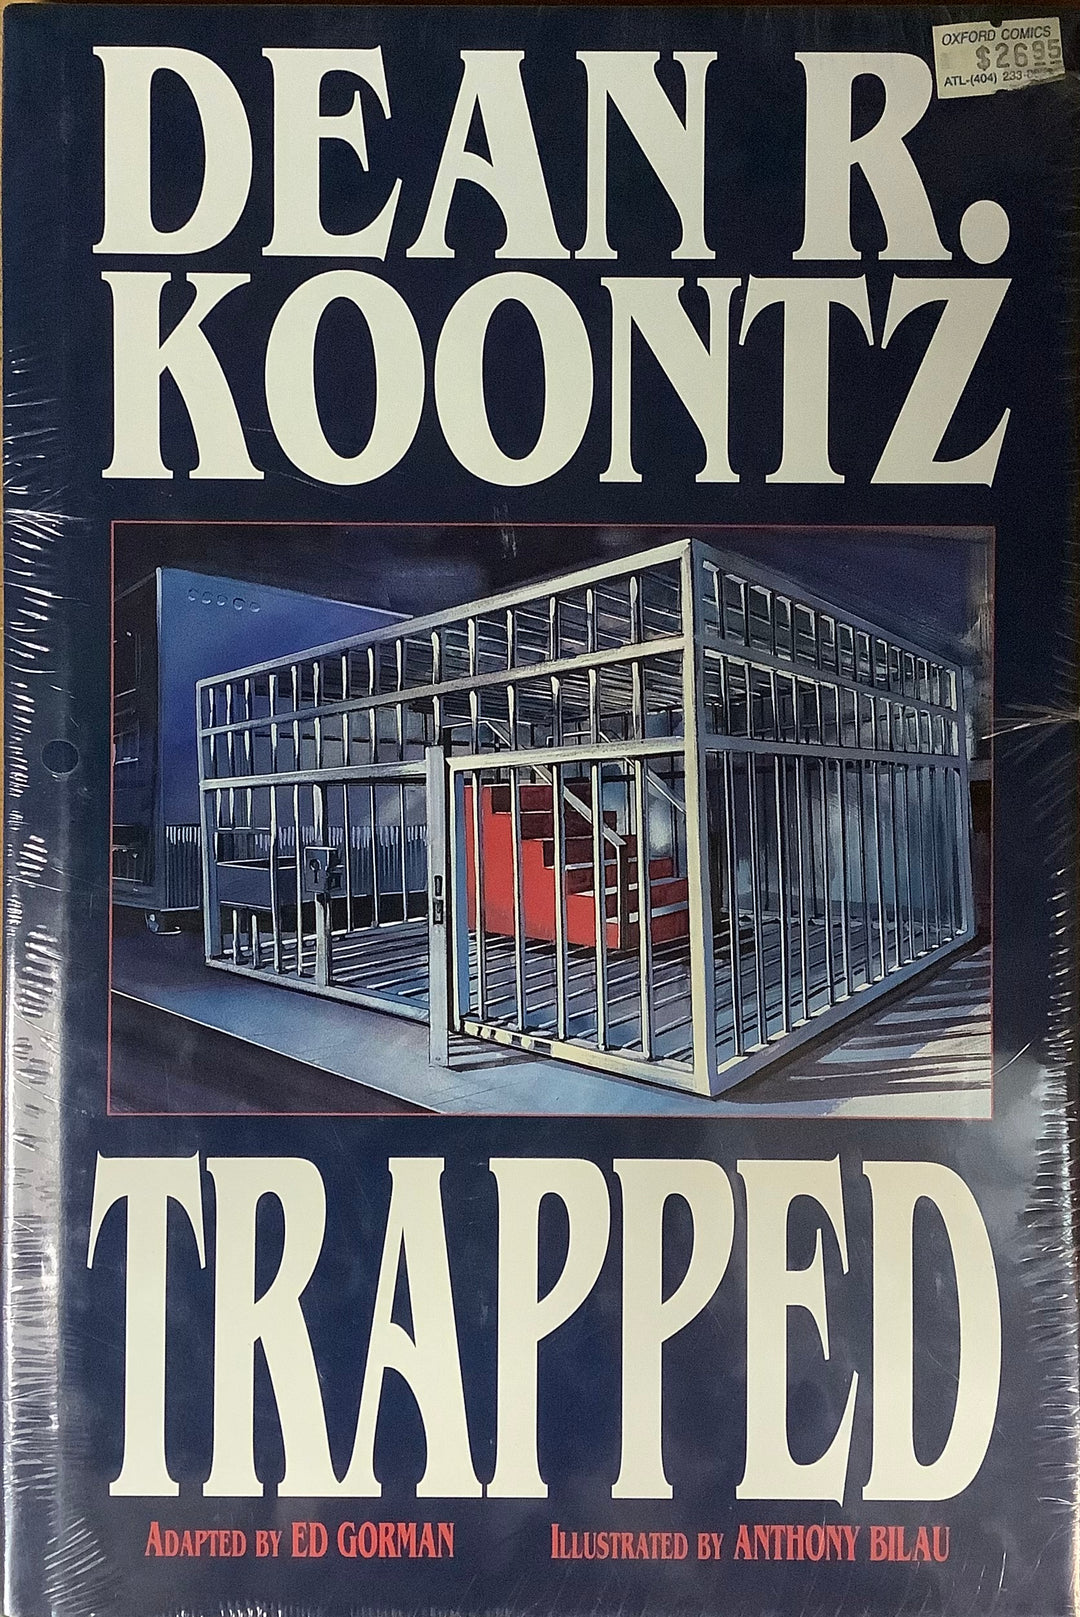 Trapped by Dean R. Koontz Hardcover Sealed Graphic Novel OXS-13